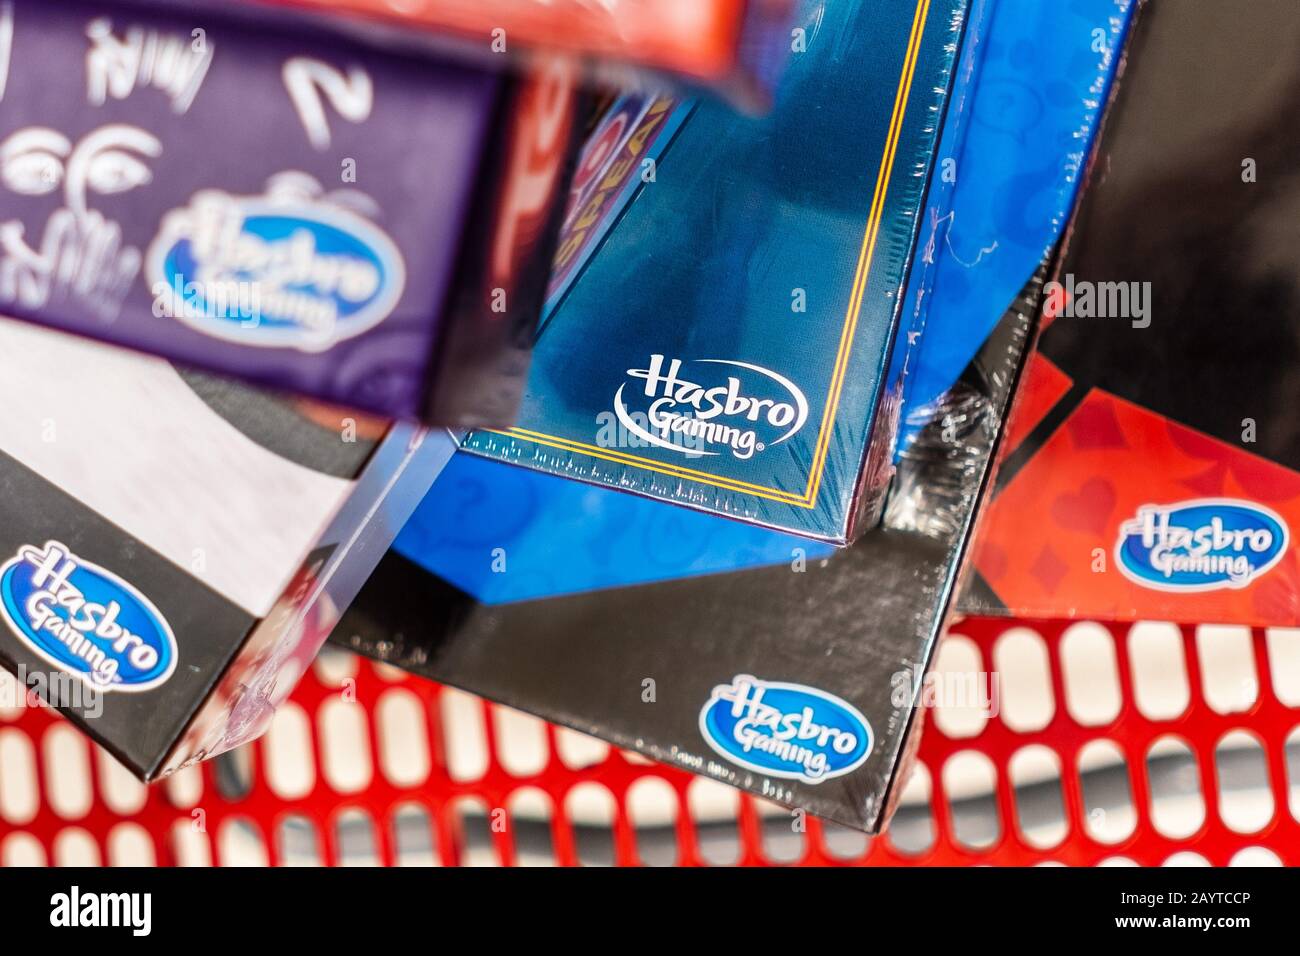 Feb 10, 2020 Sunnyvale / CA / USA - Hasbro Gaming logos visible on several Game boxes stacked in a shopping cart; Hasbro Inc is an American worldwide Stock Photo